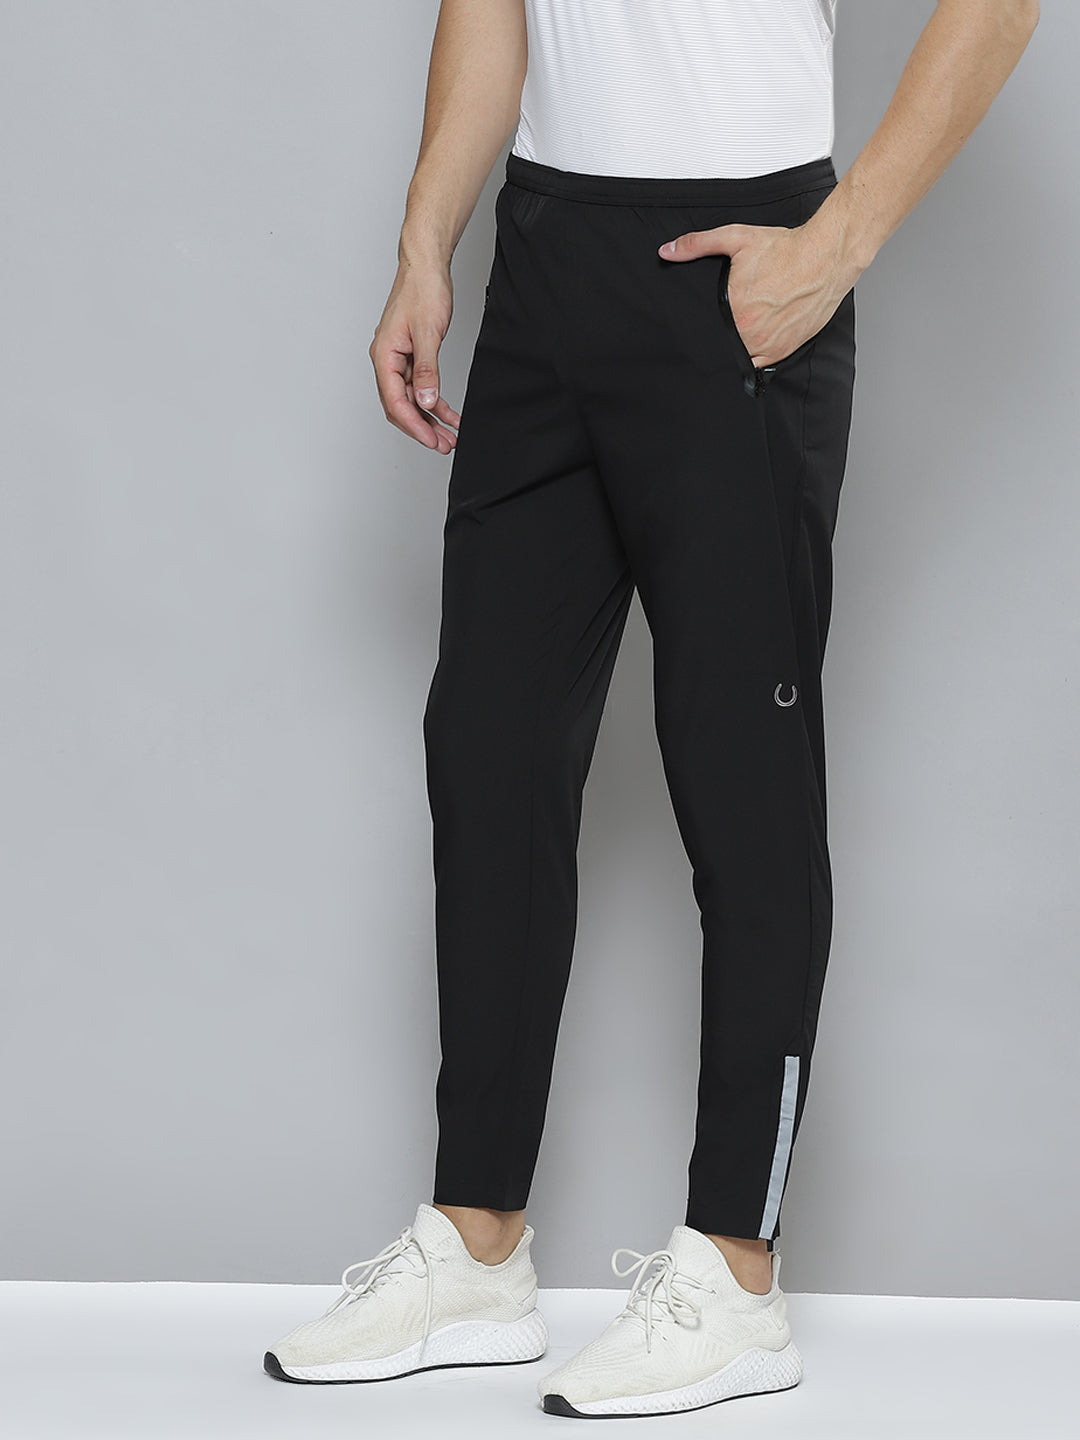 DBURKE Track Pants for Mens Track Pants Men Track Pants for Mens Sports  Sports Track Pants Lower for Mens and Women Sports Medium/Black :  Amazon.in: Clothing & Accessories